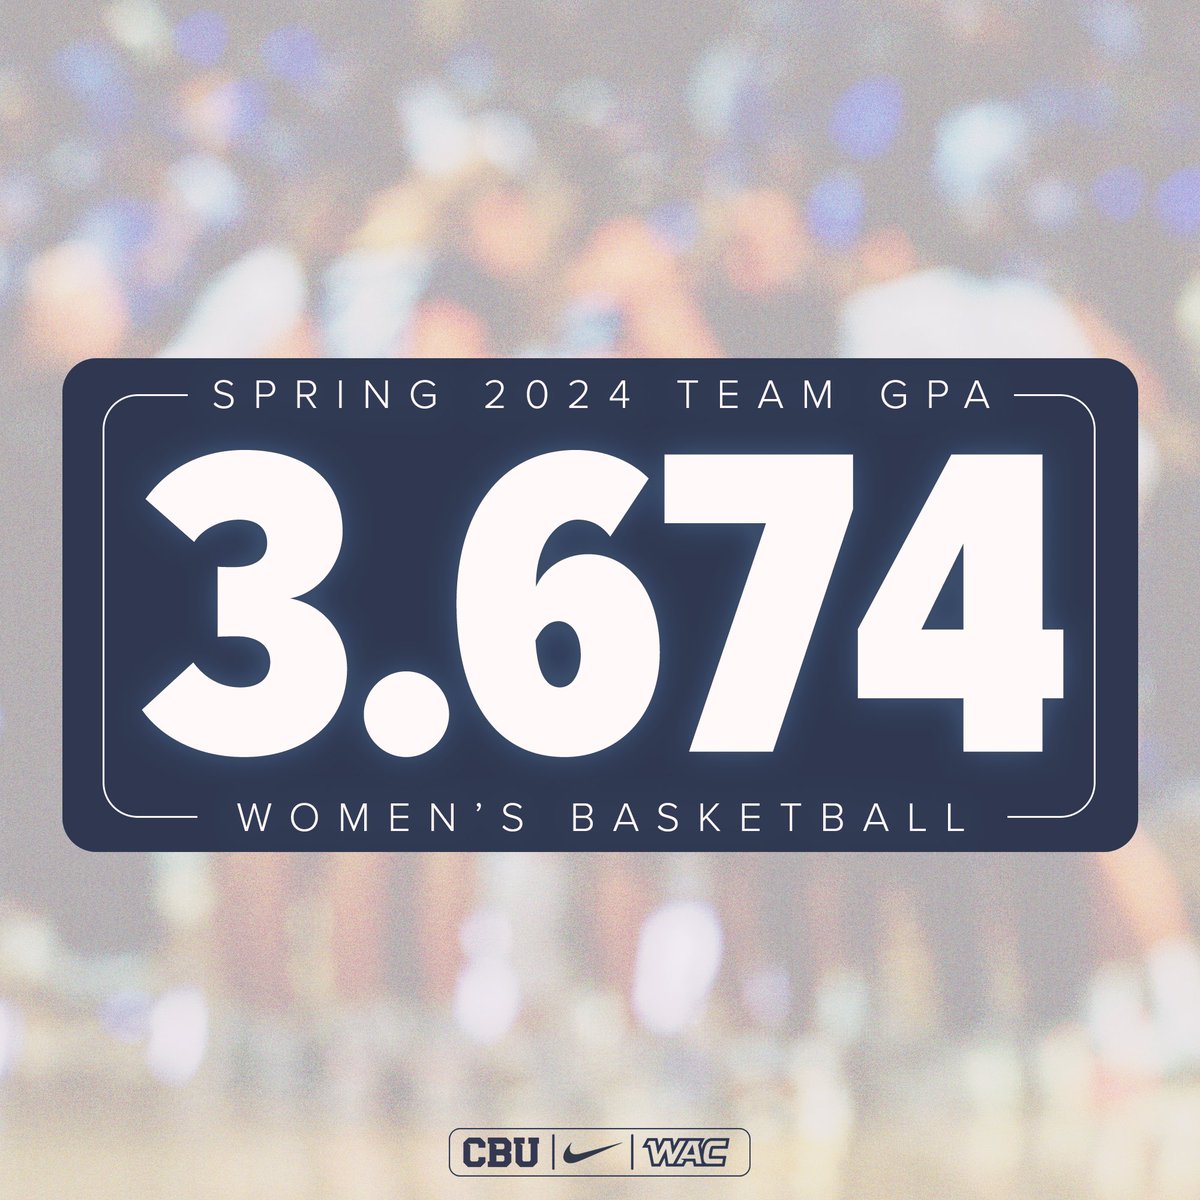 Getting it done on the court and in the classroom🏆 #LanceUp⚔️